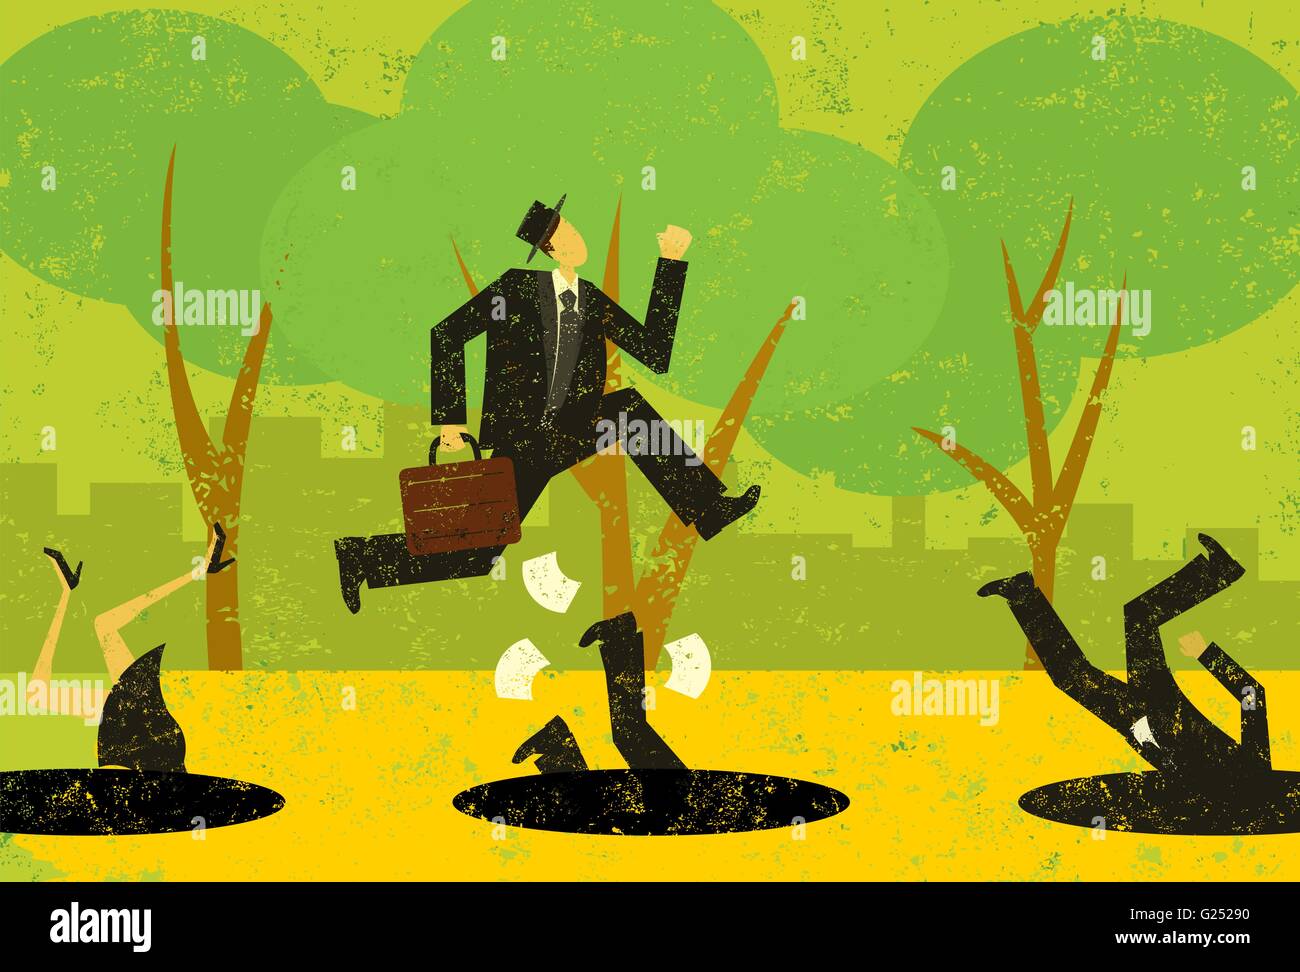 Avoiding Business Pitfalls A businessman jumping over pitfalls while others fall into them. Stock Vector